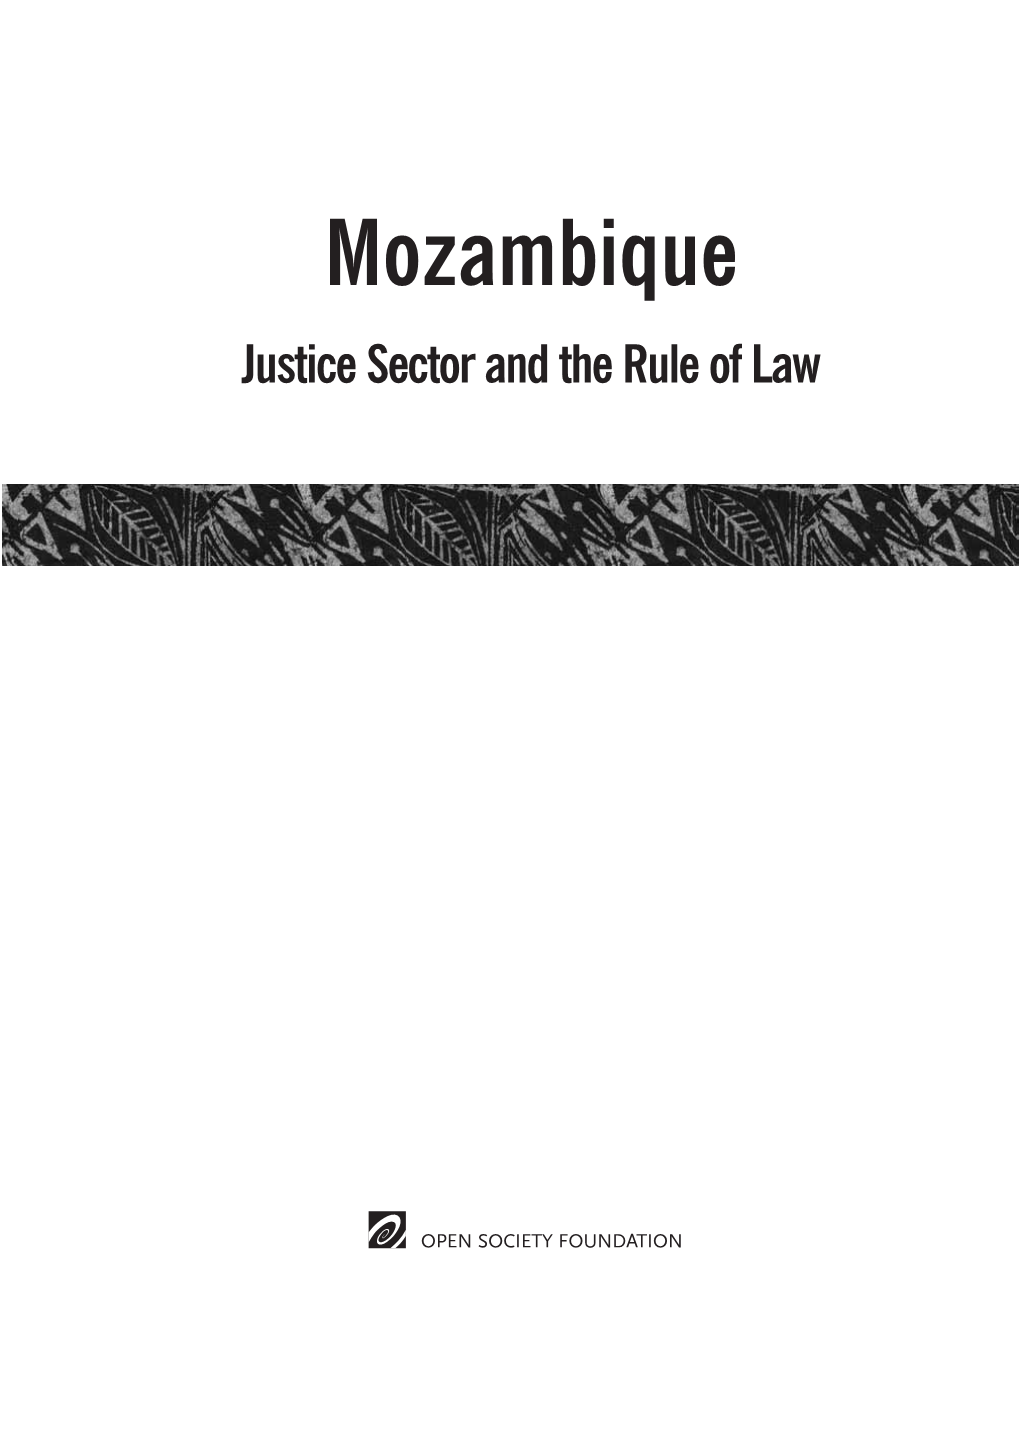 Mozambique Justice Sector and the Rule of Law